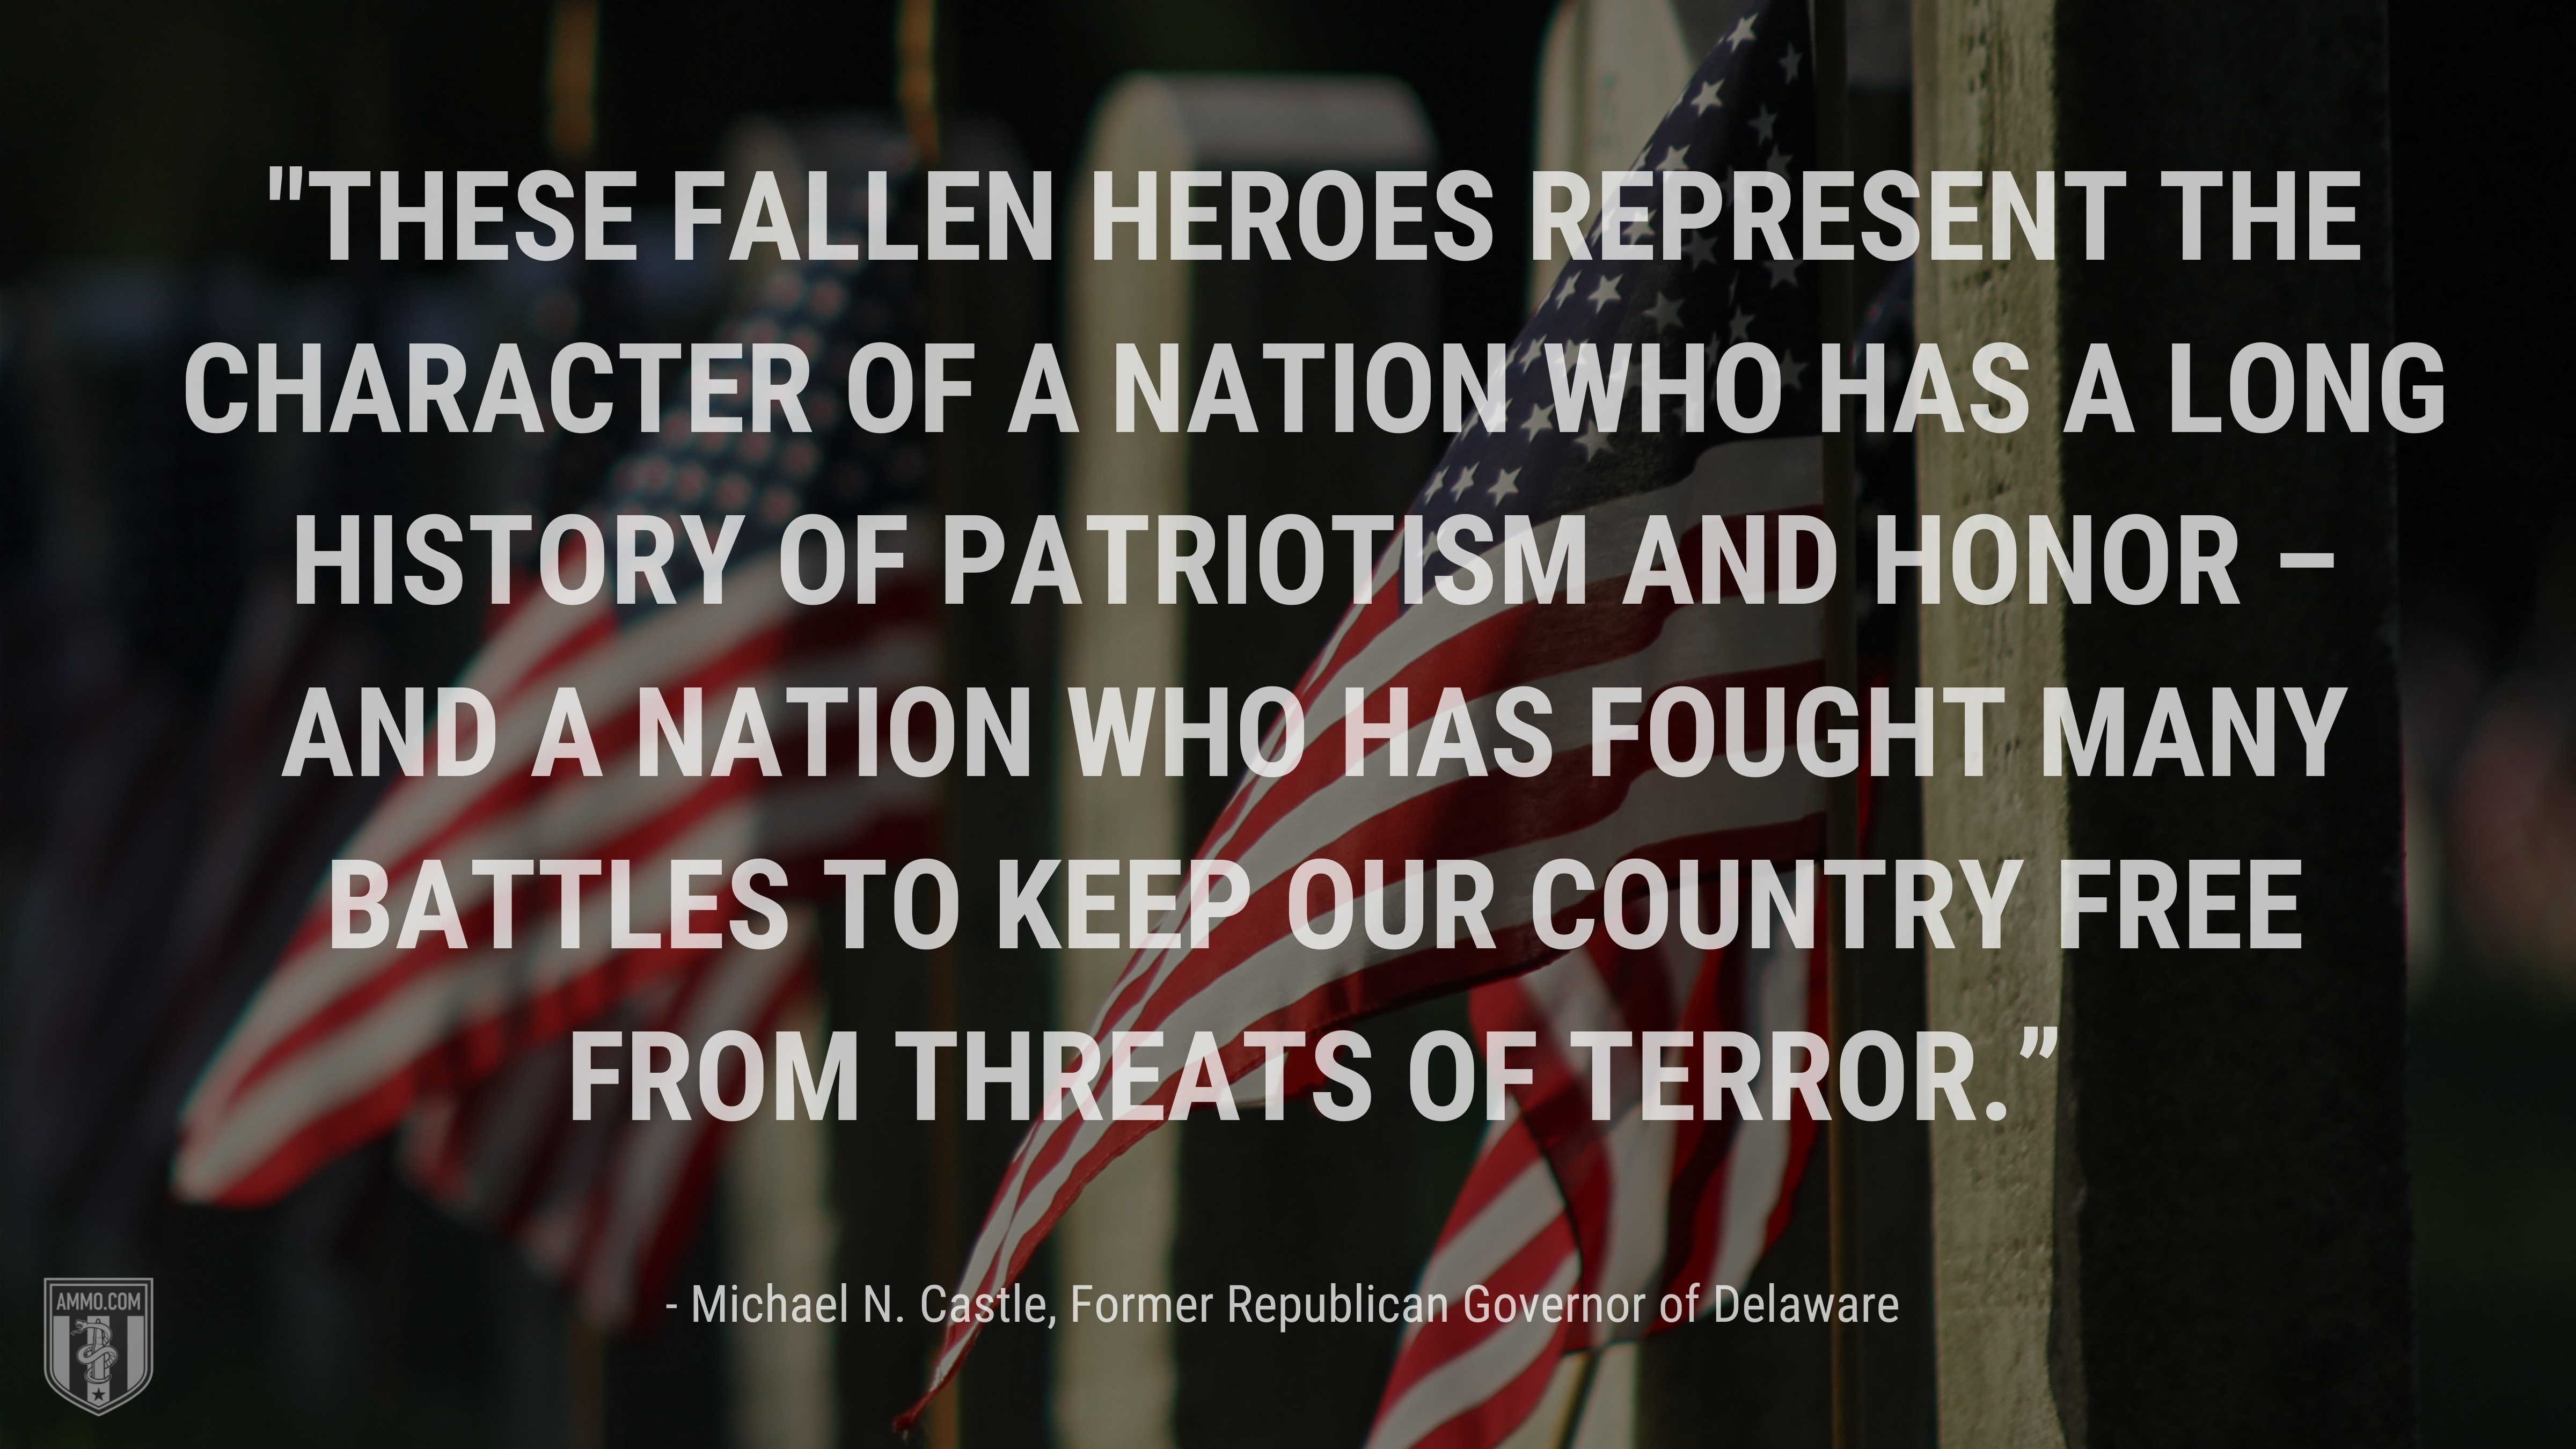 “These fallen heroes represent the character of a nation who has a long history of patriotism and honor – and a nation who has fought many battles to keep our country free from threats of terror.” - Michael N. Castle, Former Republican Governor of Delaware